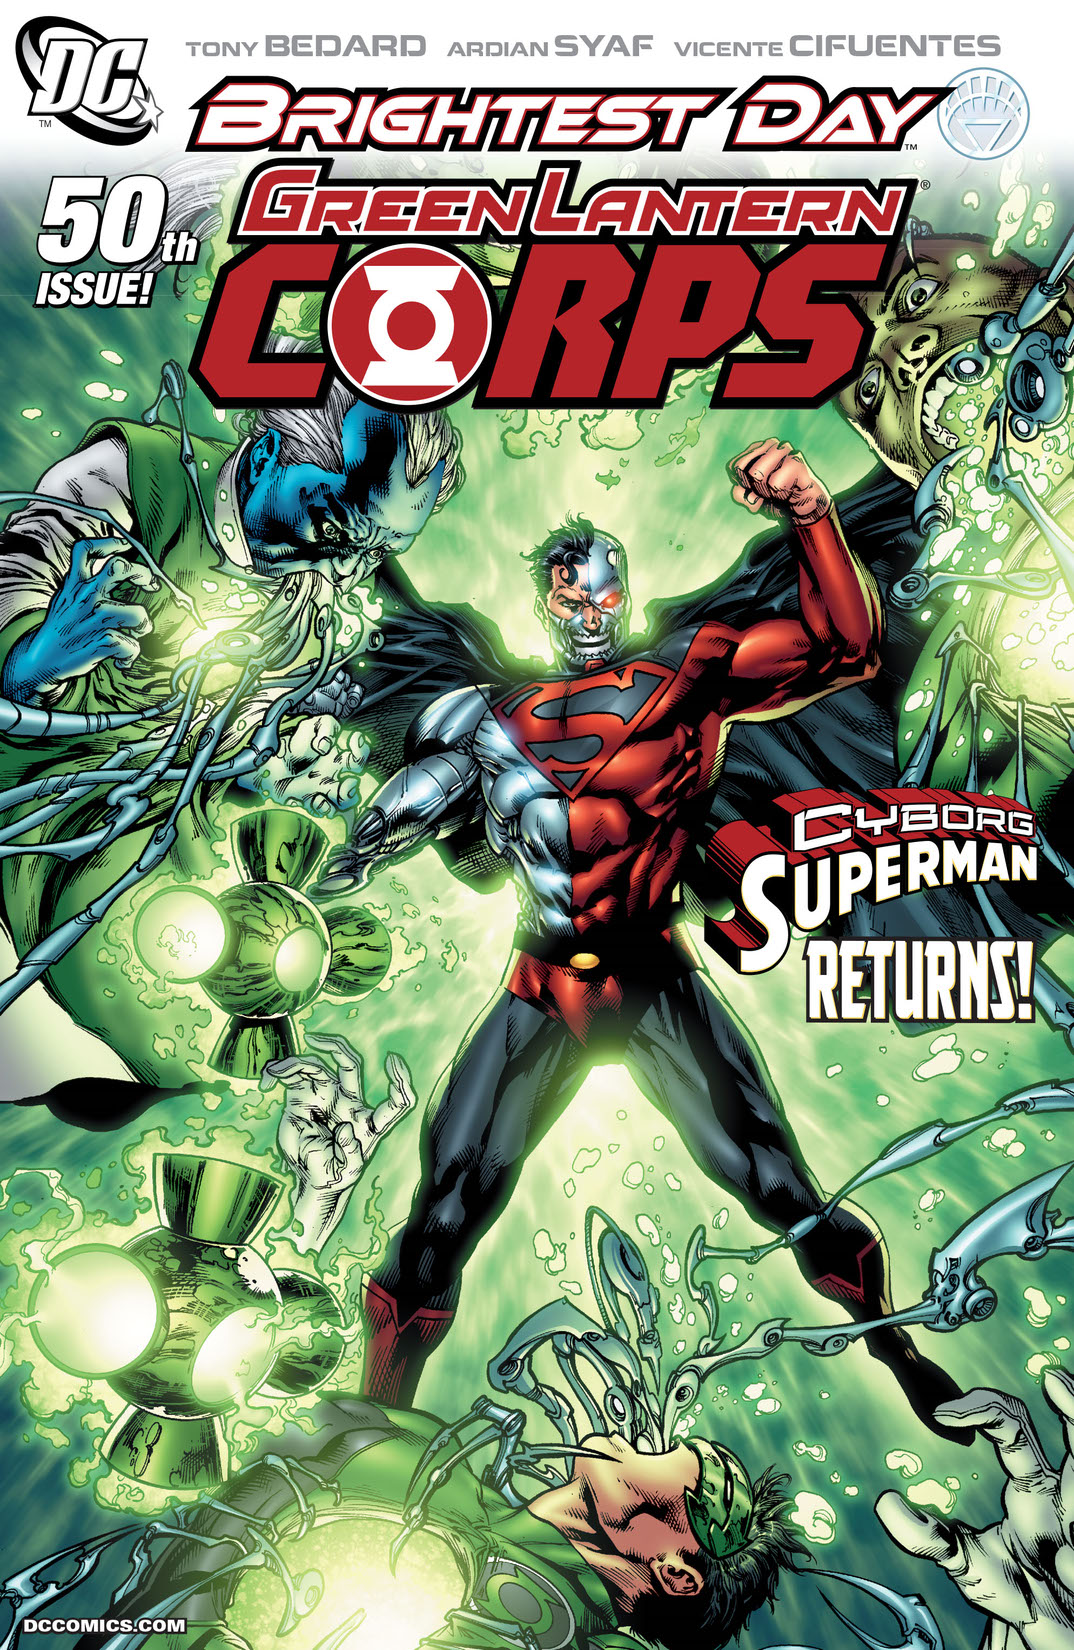 Green Lantern Corps (2006-) #50 preview images